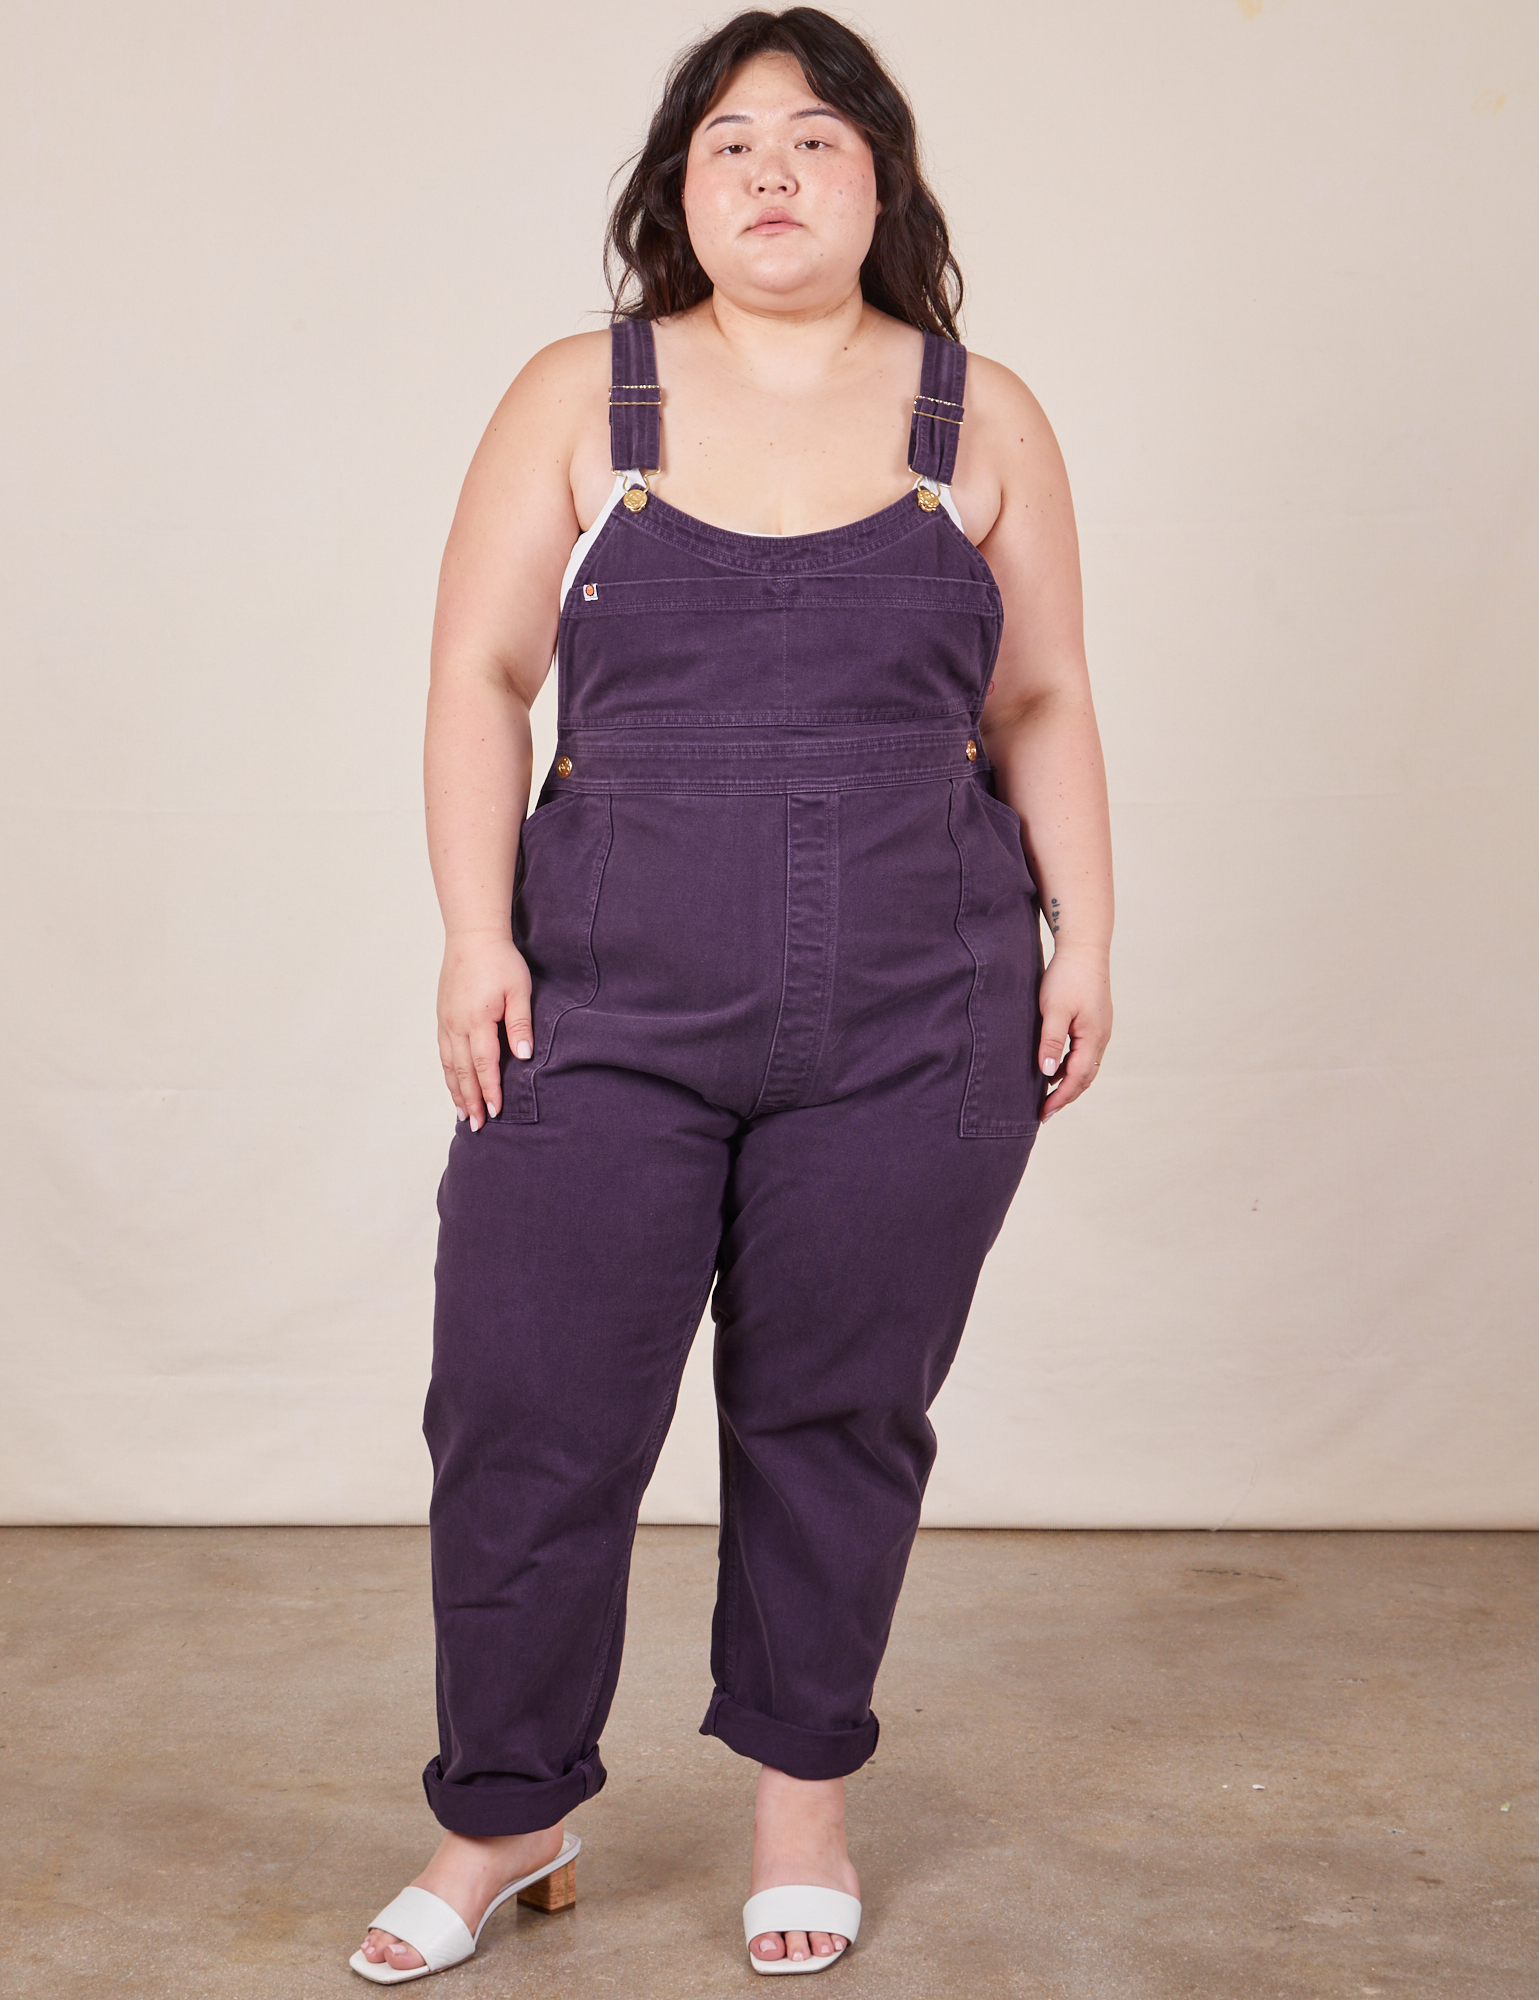 Ashley is 5&#39;7&quot; and wearing 1XL Original Overalls in Mono Nebula Purple